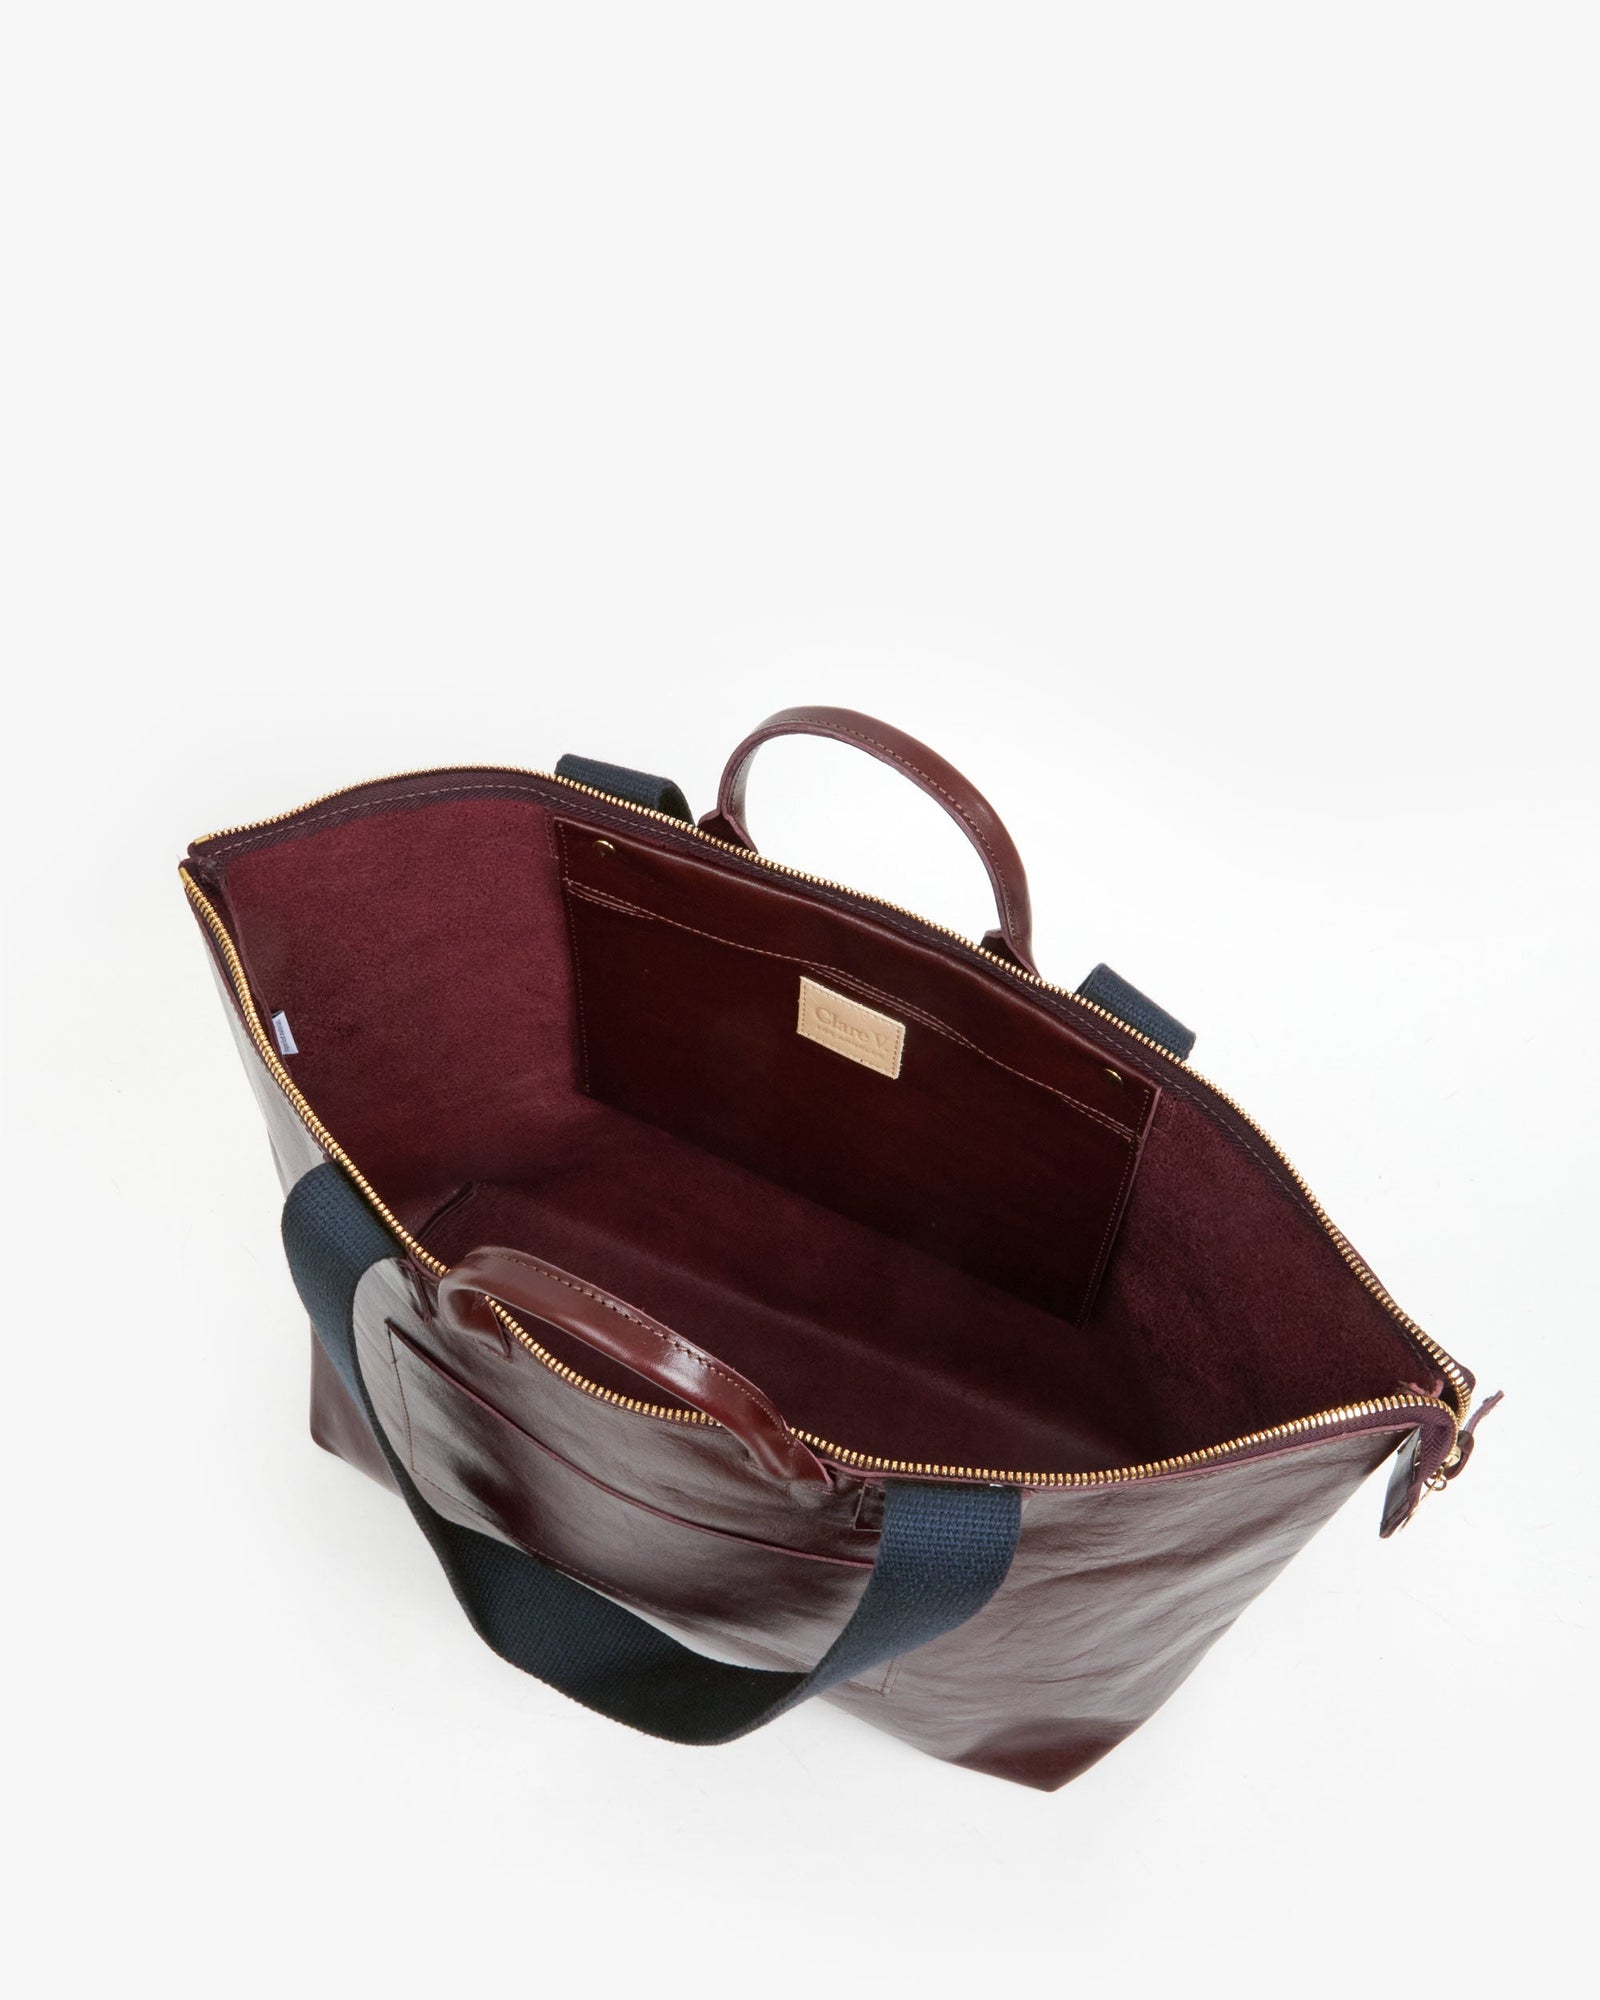 Interior flat of the Plum Le Zip Sac w/ Front Pocket